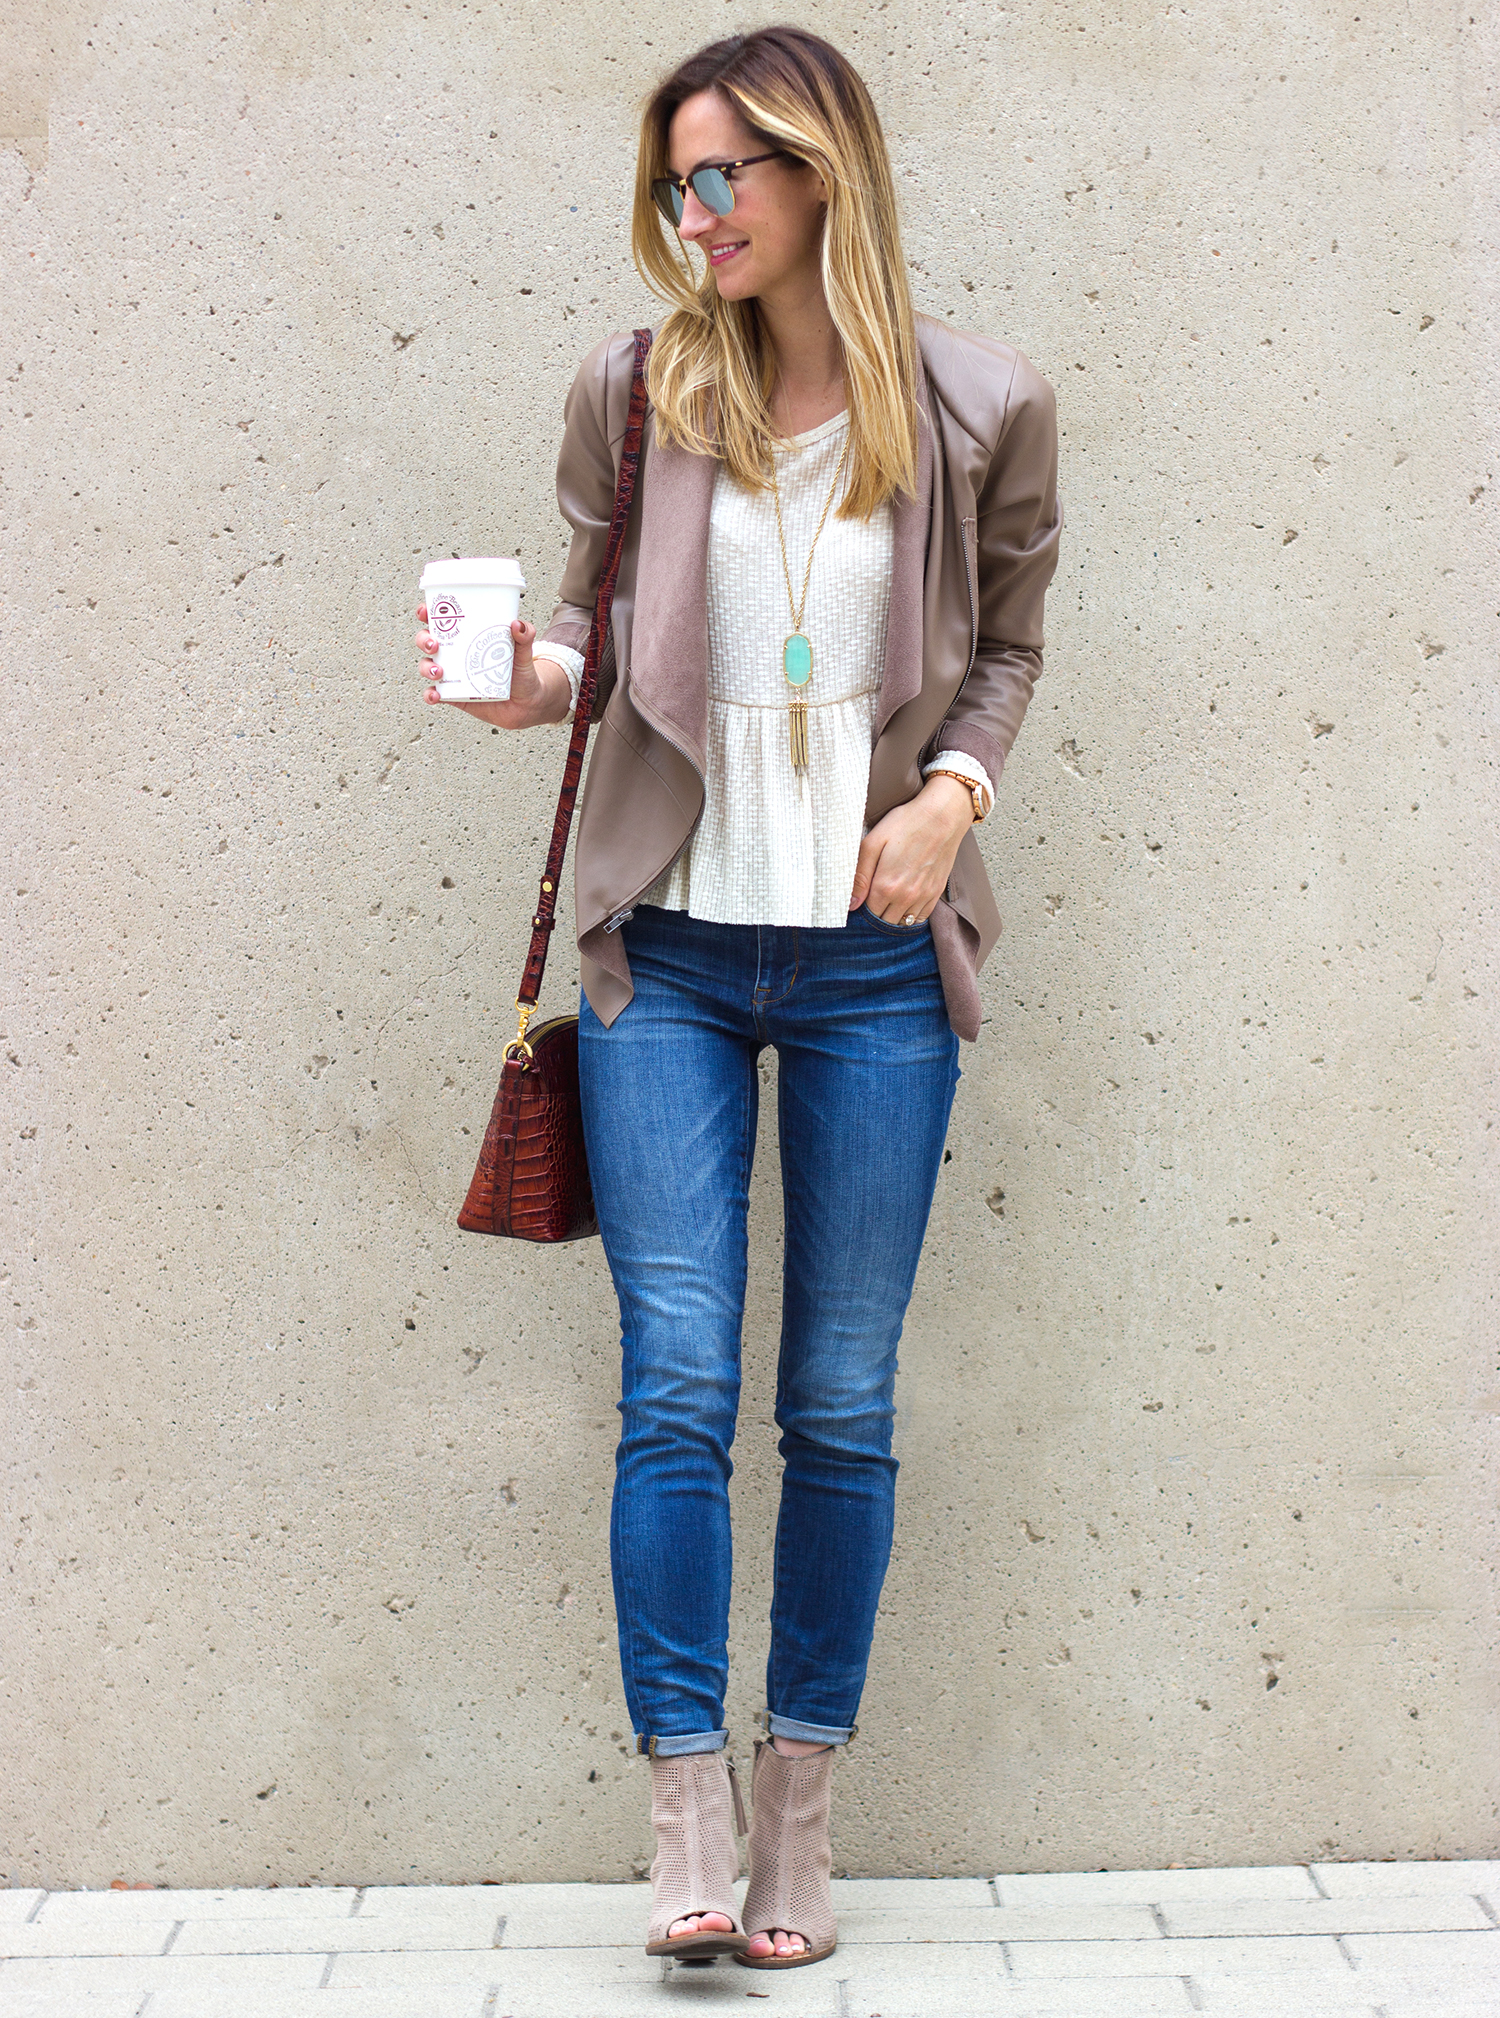 open toe booties outfit